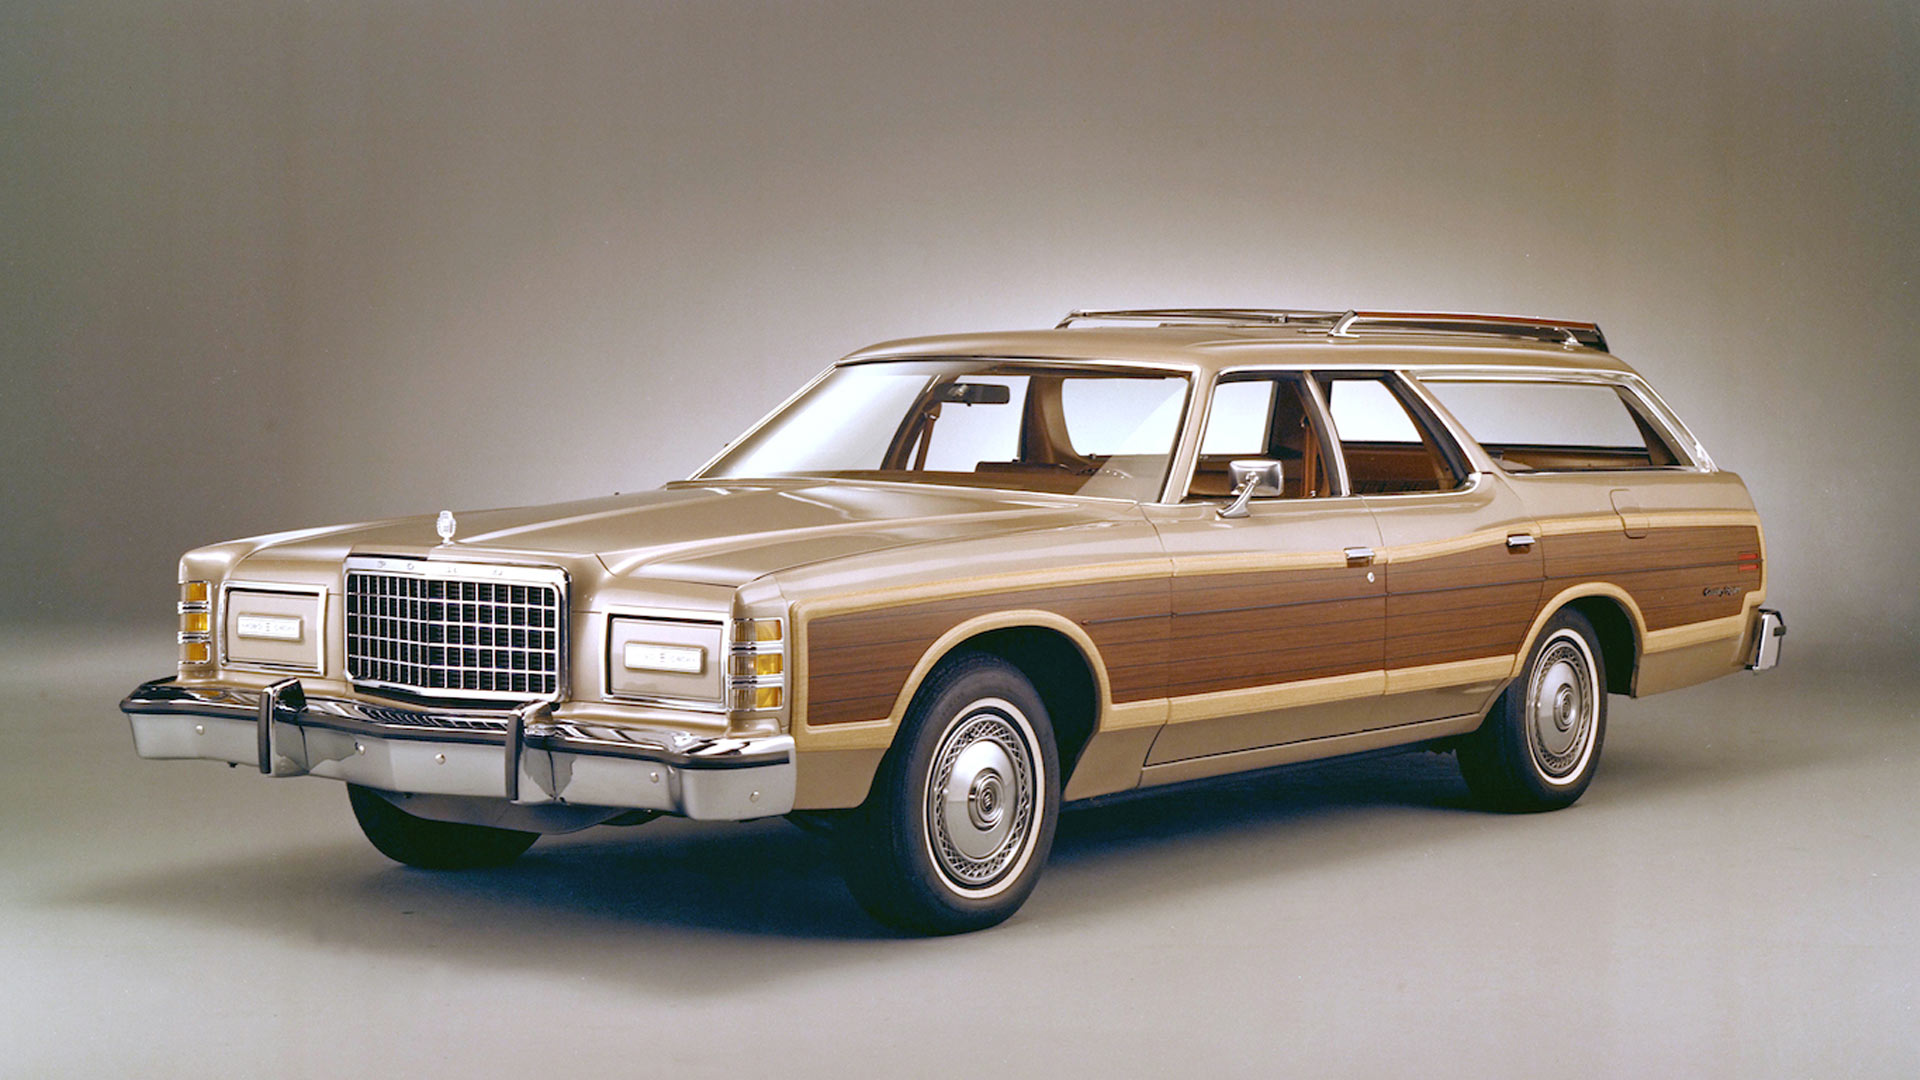 <p>Nothing says ‘premium’ like slapping simulated woodgrain to the side of a station wagon. But from 1951 to 1991, Ford’s full-size estate would feature imitation timber trim. The 1978 Country Squire would become a final flourish for outlandish size, as the following year would see a smaller seventh-generation car.</p> <p>But in 1978, tipping the scales at some 4,881 lb meant even the largest engine option of the 7.5-liter (460-cubic inch) V8 could only push the Squire to a maximum of 111mph. Still, at least you wouldn’t have to worry about varnishing that wood.</p>